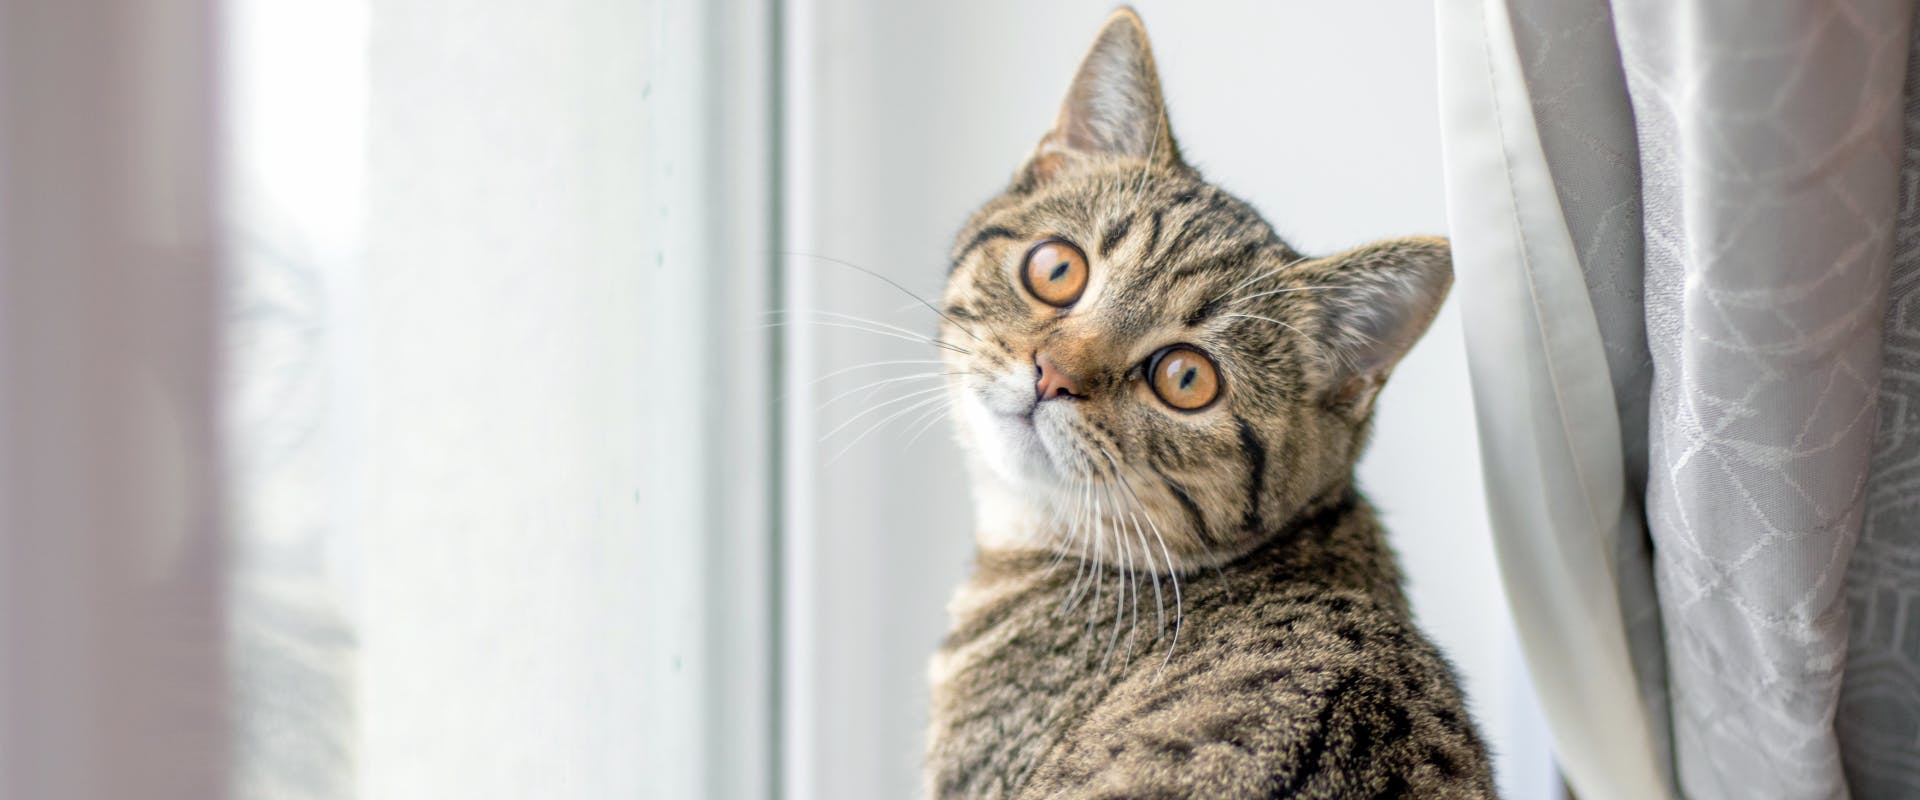 a brown tabby cat with orange eyes sat on a windowsill looking over its shoulder at something behind the camera